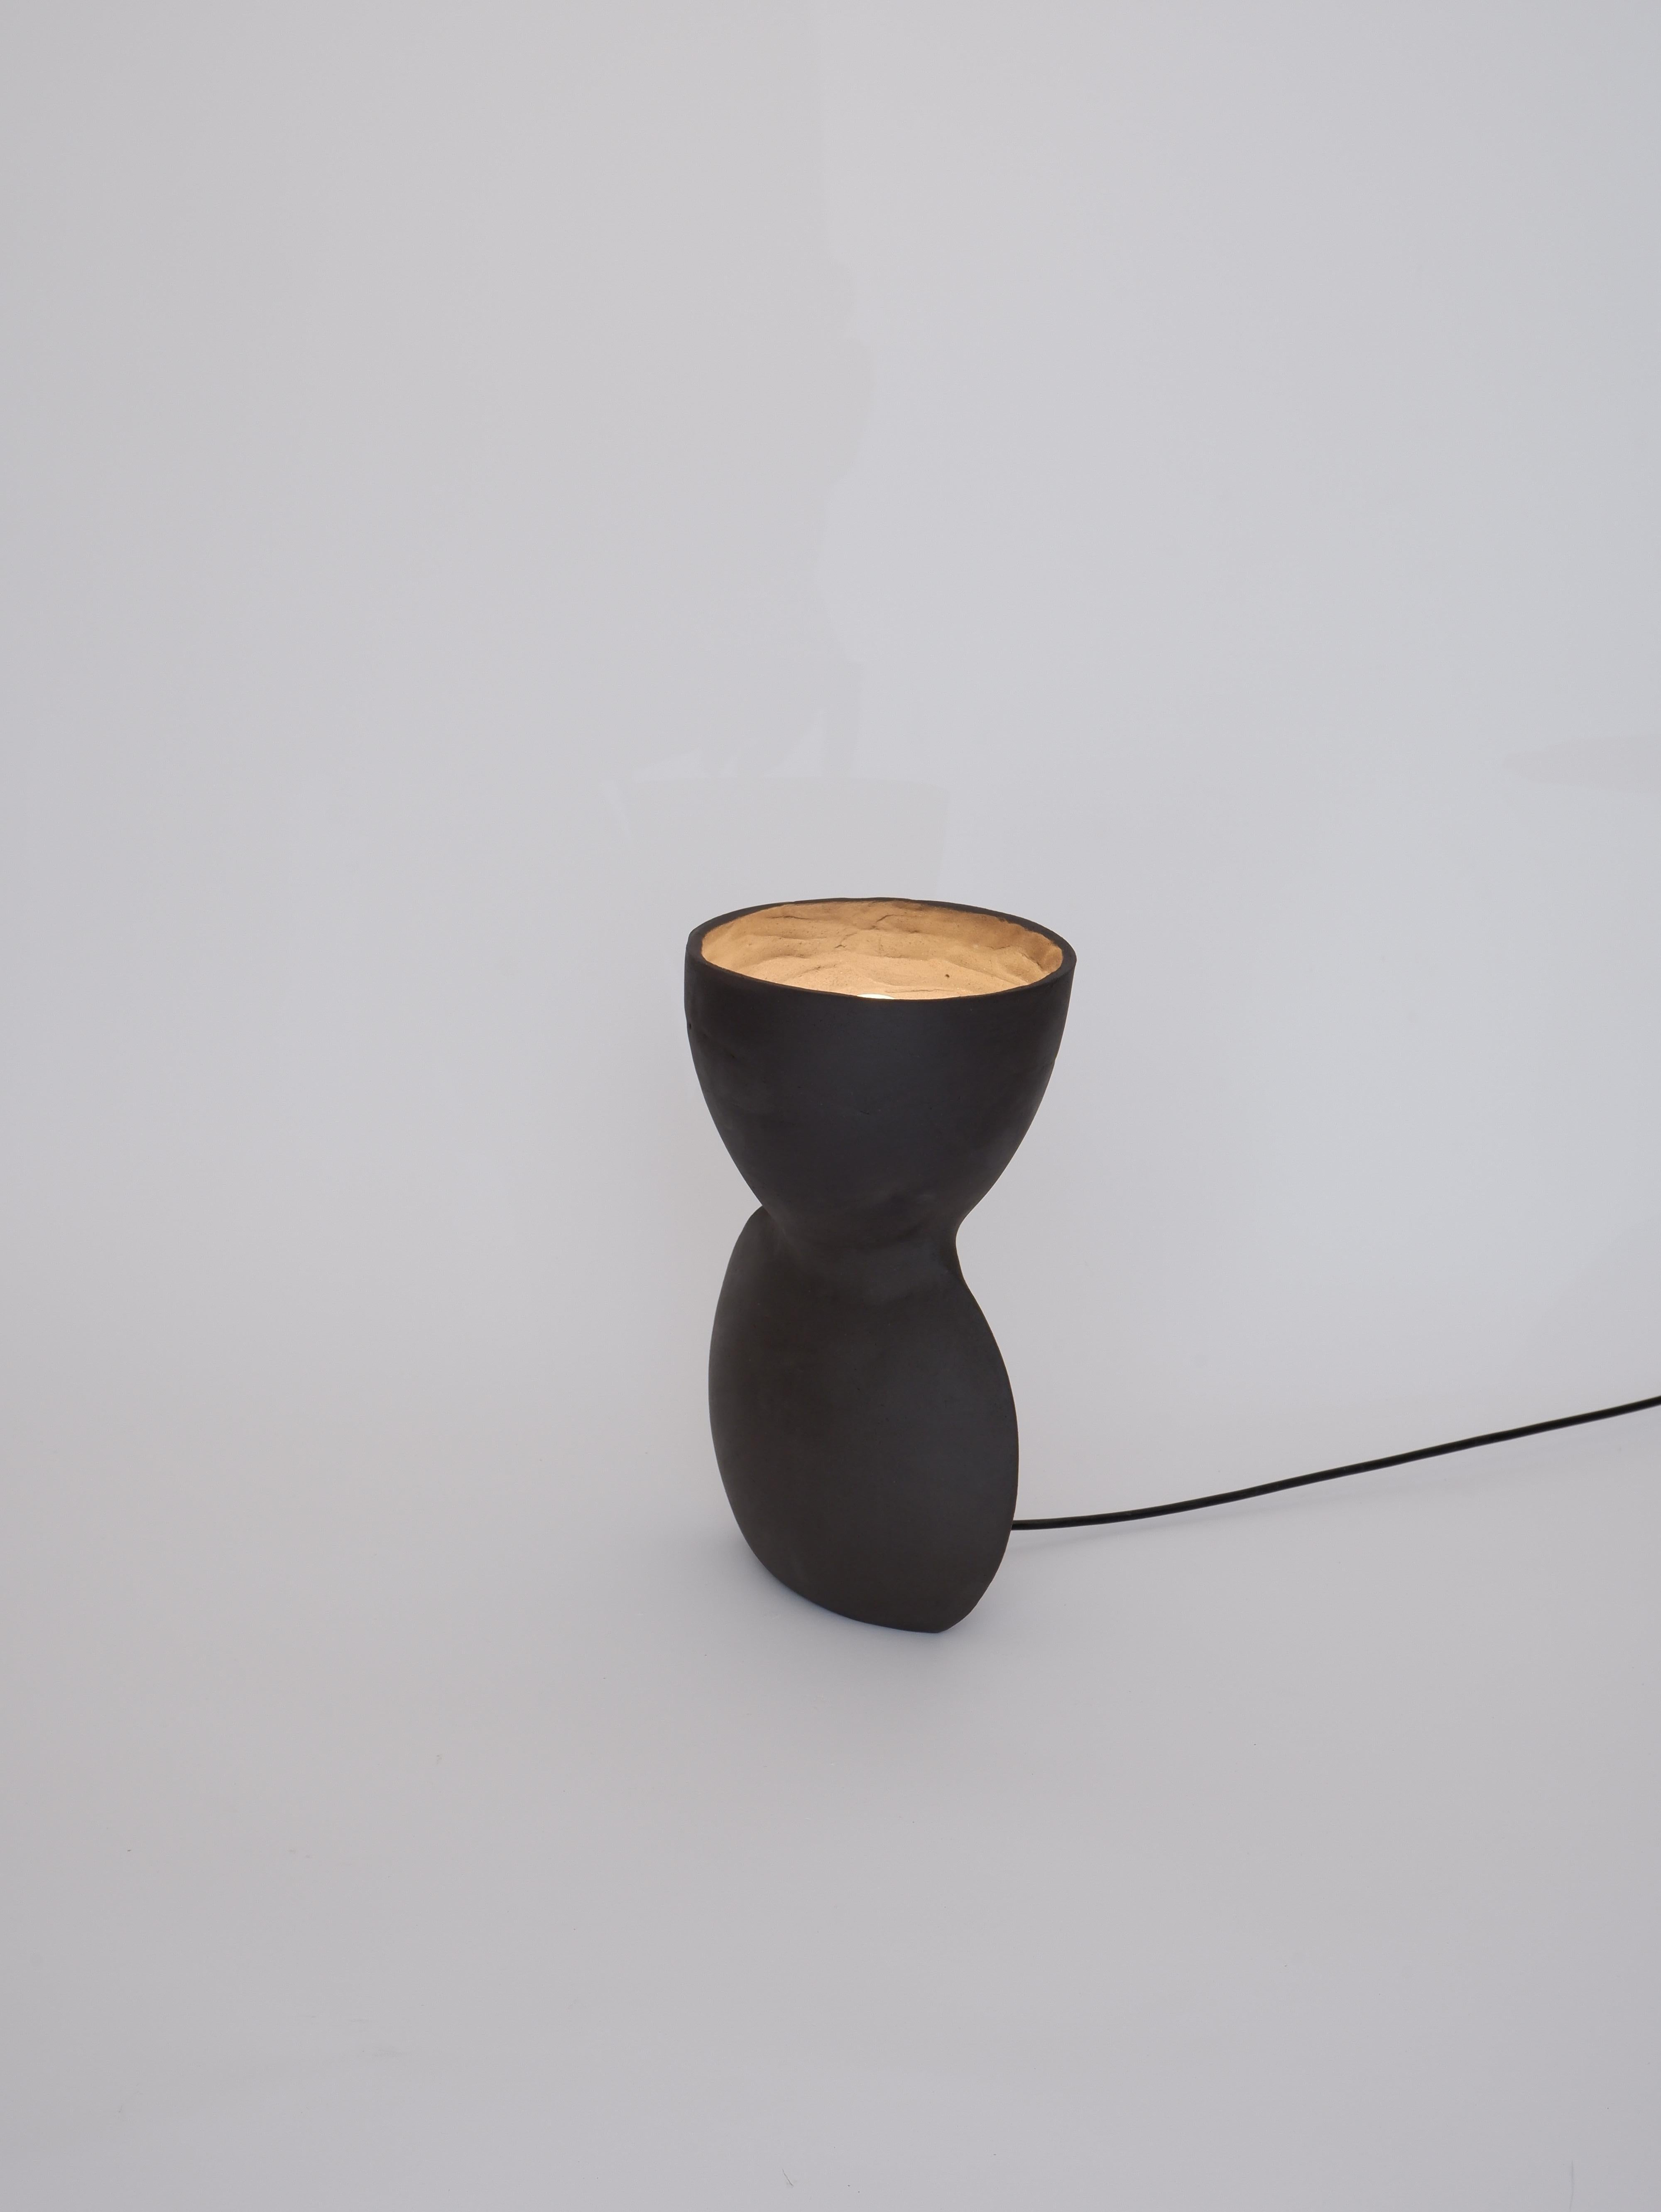 Unira Big Black Lamp by Ia Kutateladze
One Of A Kind.
Dimensions: D 17 x W 23 x H 32 cm.
Materials: Clay.

Each piece is one of a kind, due to its free hand-building process. Different color variations available: raw black clay, raw white clay and